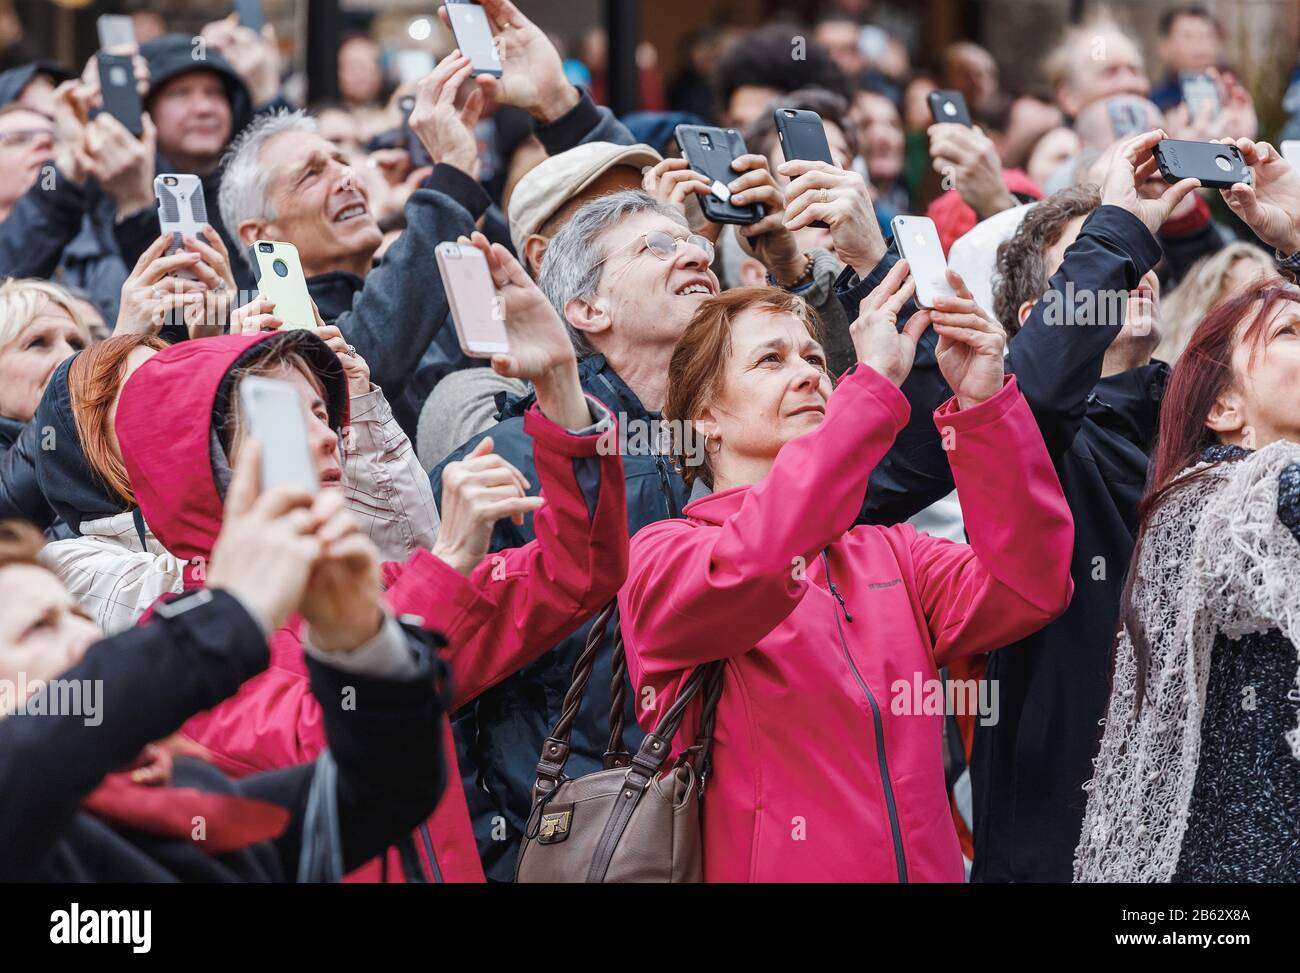 PRAGUE, CZECH REPUBLIC - 18 MARCH, 2017: A multinational large crowd of tourists photograph on smartphones and look up at the city's landmark Stock Photo